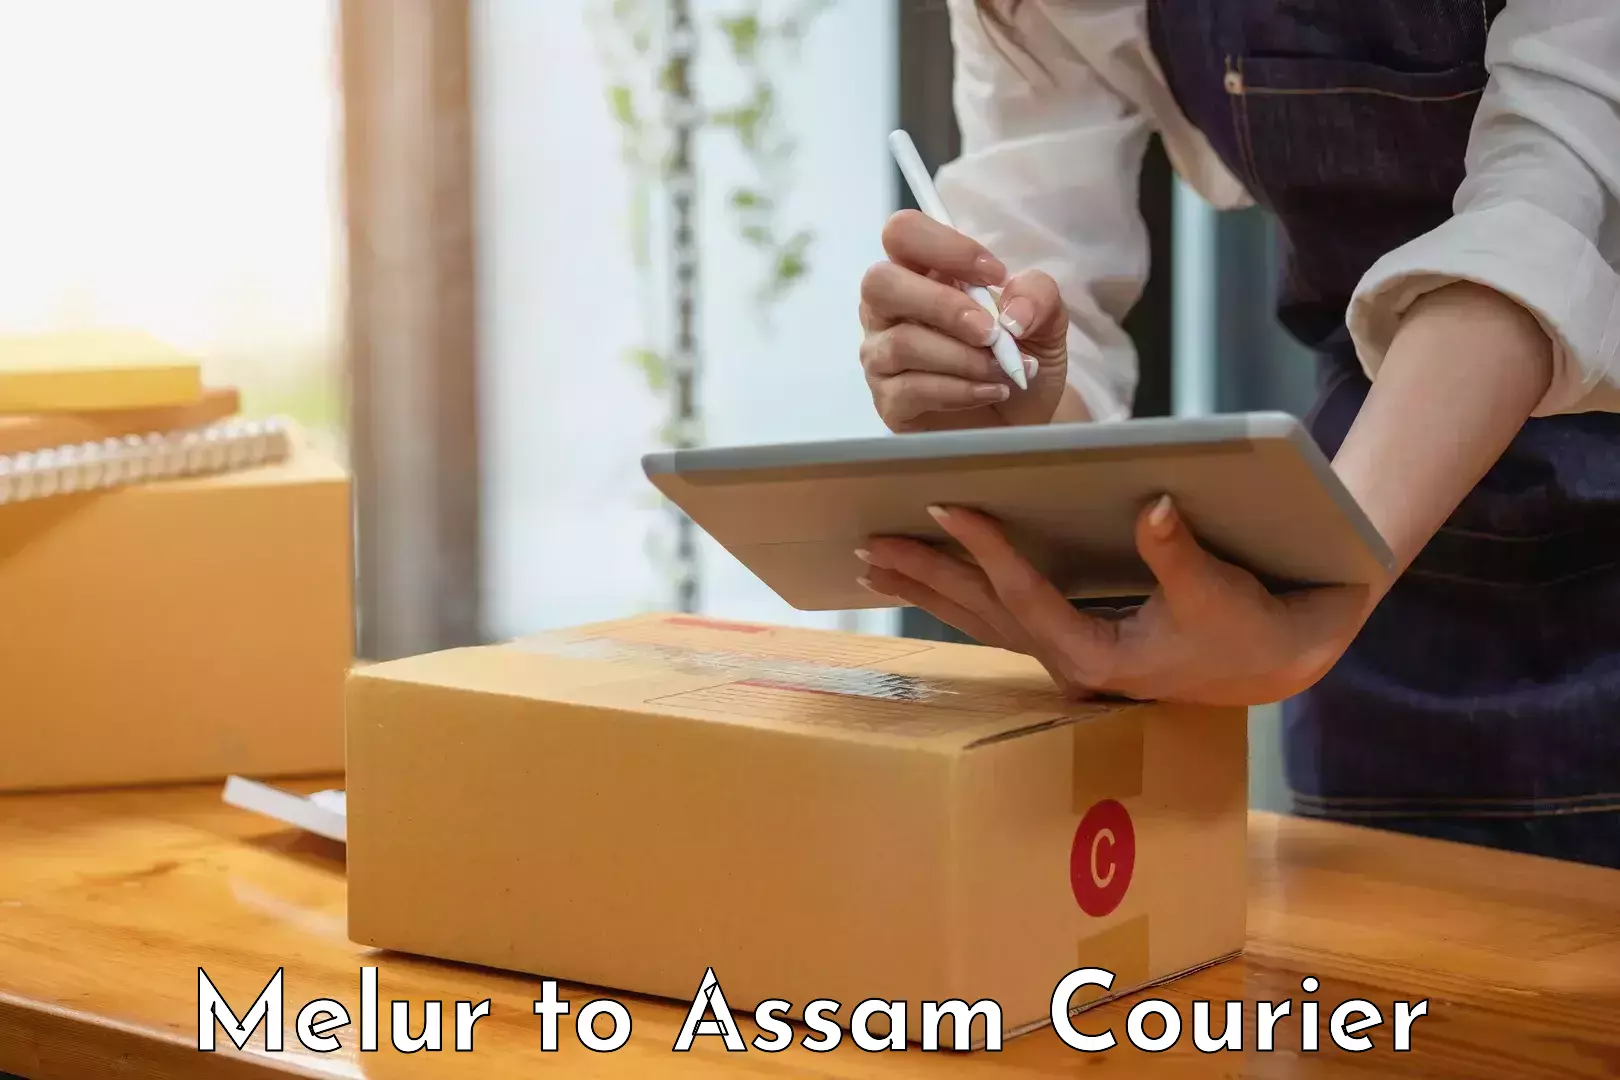 Enhanced tracking features Melur to Assam